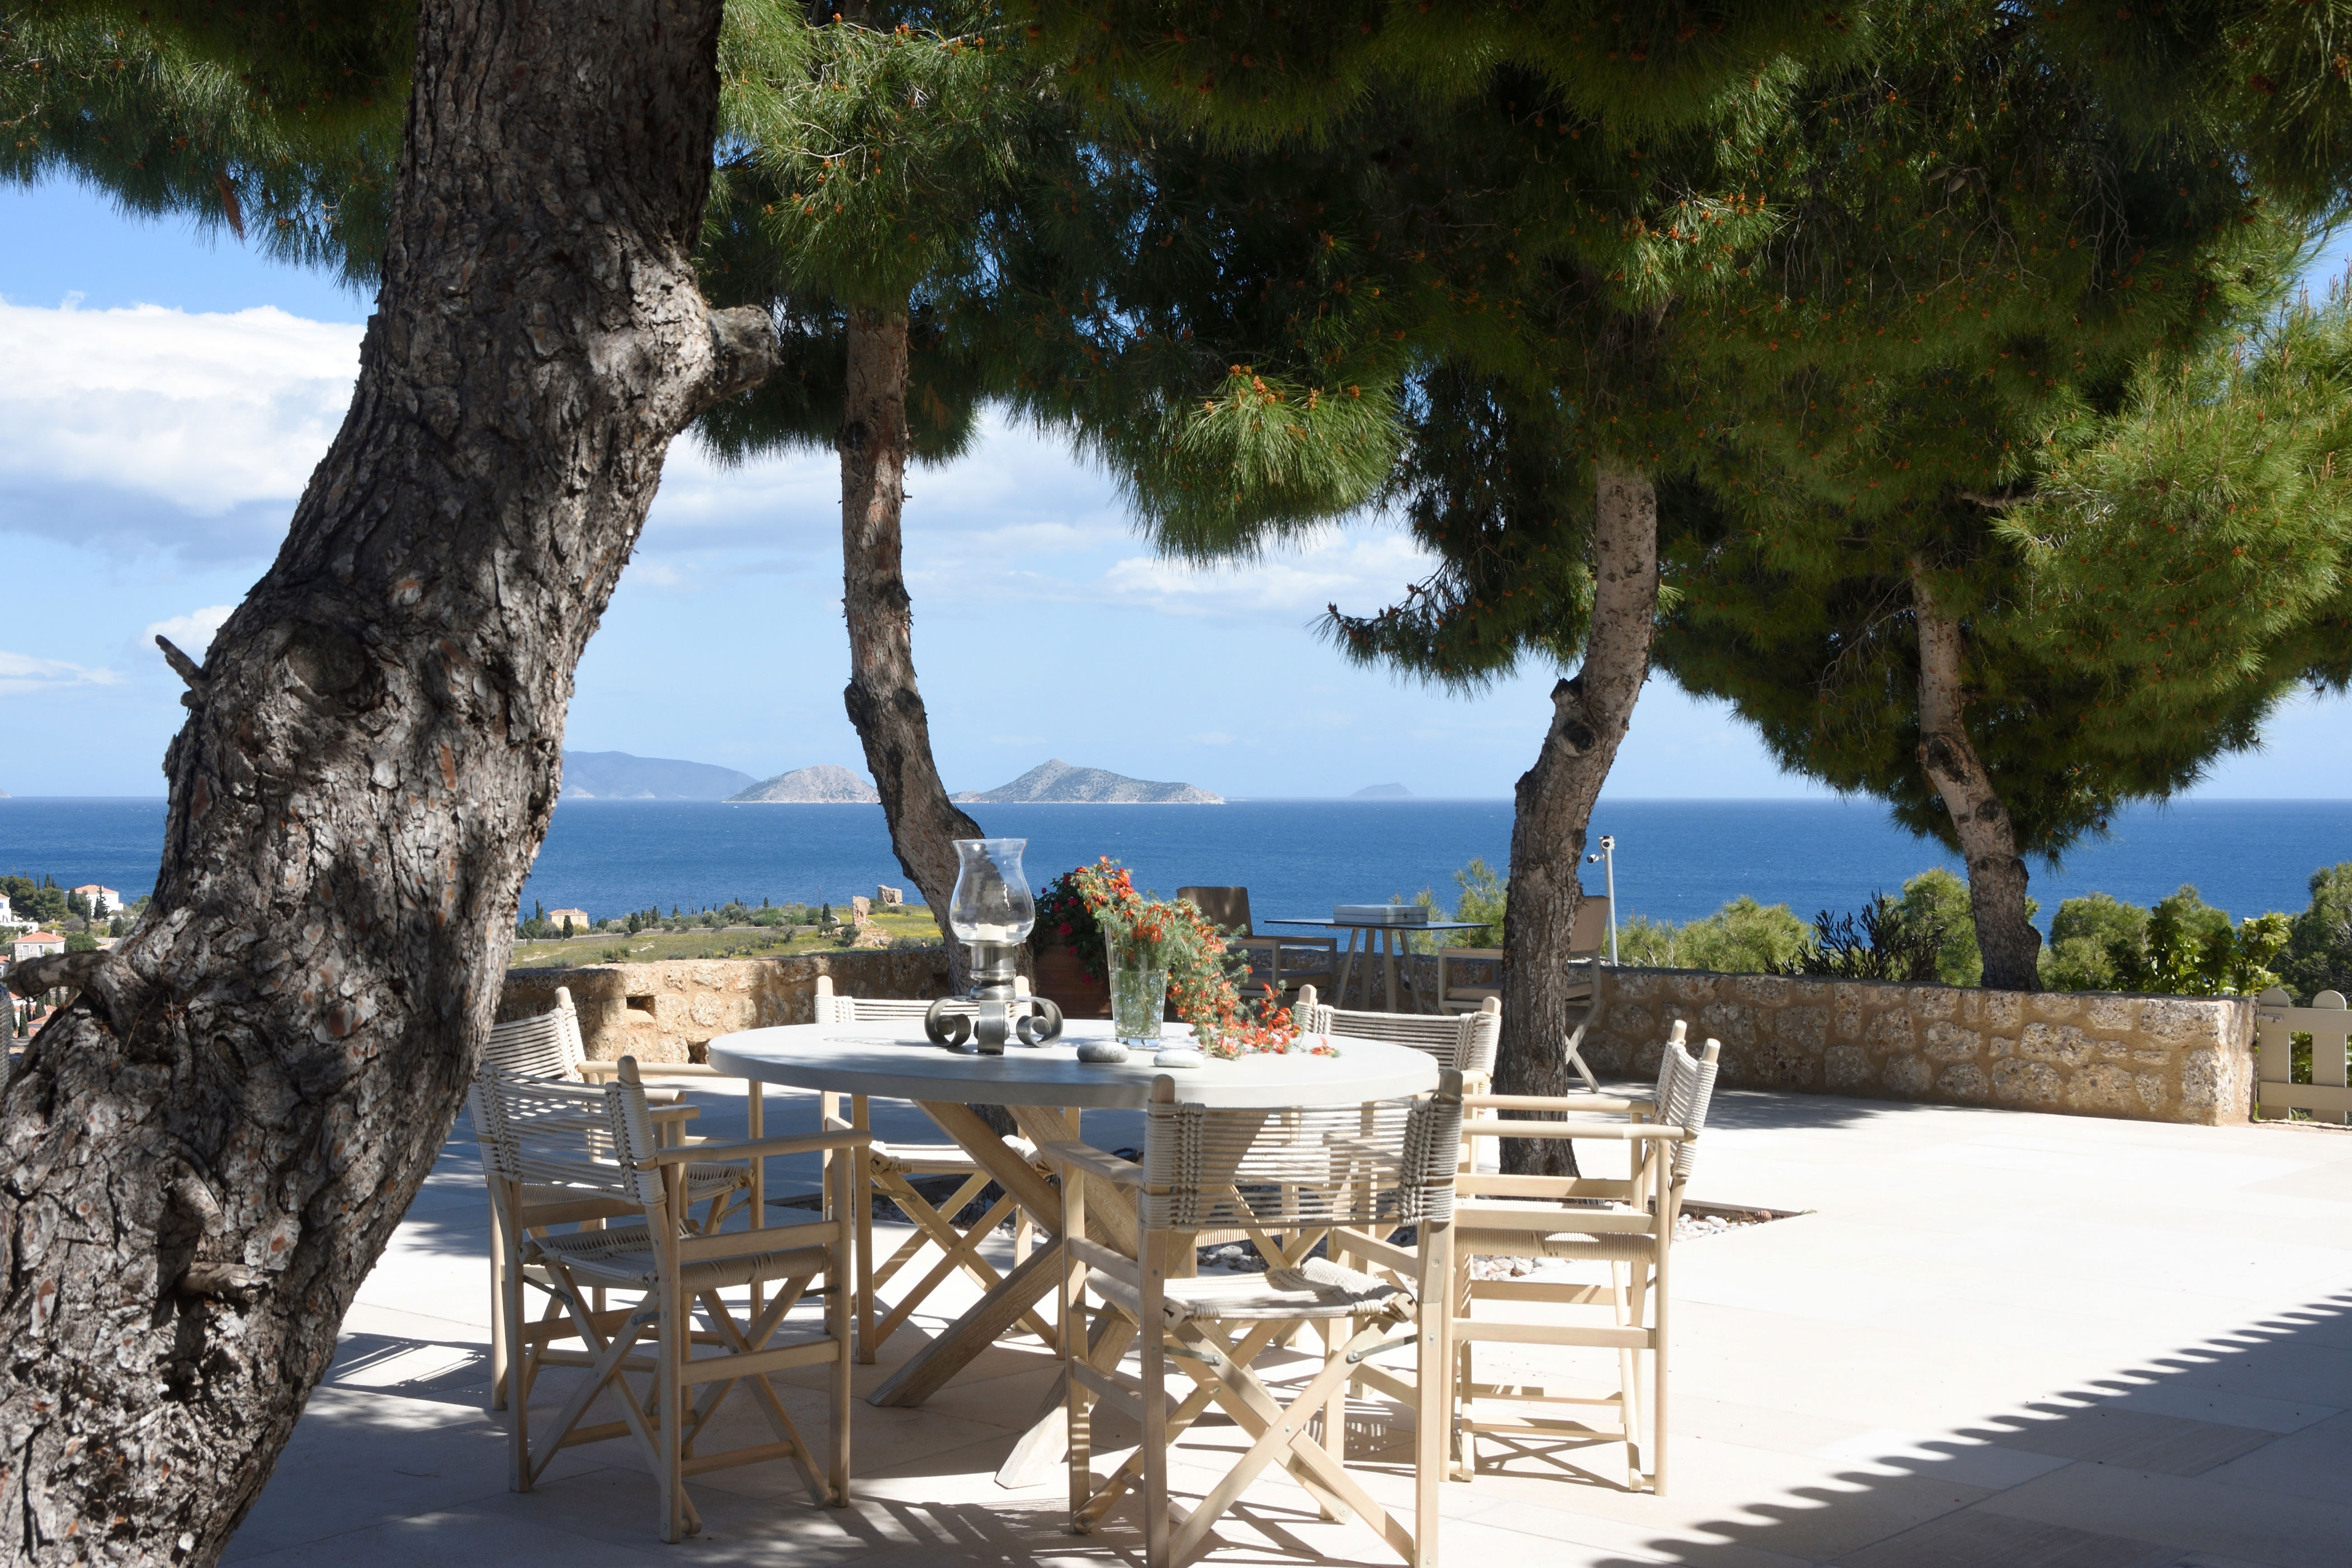 <p><strong>Spetses town, Spetses</strong></p> <p>There's an abundance of Bougainvillea-covered space at this 5.5-acre hilltop villa, and yet the charming town of Spetses, as well as a beach, are only a 15-minute walk. With multiple terraces across the estate, including terrace access from all seven bedrooms, the villa's breathtaking sea views can be admired from multiple vantage points. Even the infinity pool, with its own bar, overlooks the azure waters. Interiors are an elegant fusion of contemporary and classic Spetsian design, with breezy white bedrooms, all with ensuite bathrooms, spread across the main house and two separate guest houses. A stay here includes a daily cleaning service as well as breakfast preparation. For lunch, head to Orloff on the harbor for Mediterranean-style grouper caught fresh that morning. Spetsis is a car-free island, so one of the best ways to see the sights, including the oldest lighthouse in Greece, is via bike. —<em>Sophie Chai</em></p> <p><strong>Sleeps:</strong> 14<br> <strong>Price:</strong> From $28,561 per week</p> <div class="callout"><p><a href="https://cna.st/affiliate-link/2h8zKZvUAqv9ZGdPBBMCgc3ucFhn3FFRsivSjhQfLfnnqsCfuwqYYNiF7vij4qJB9LpoL7owqWsqEG3Hyt4WxtmArUenbceeTinknRqR6nH8z3DDPGx9DAFtpCHiQC5kUtReuwnmzaJVoyGGQnviKV7jY4TbvdtgMC5R13eENwJKAGNDSp" rel="sponsored" title="Book now at The Thinking Traveller">Book now at The Thinking Traveller</a></p> </div><p>Sign up to receive the latest news, expert tips, and inspiration on all things travel.</p><a href="https://www.cntraveler.com/newsletter/the-daily?sourceCode=msnsend">Inspire Me</a>